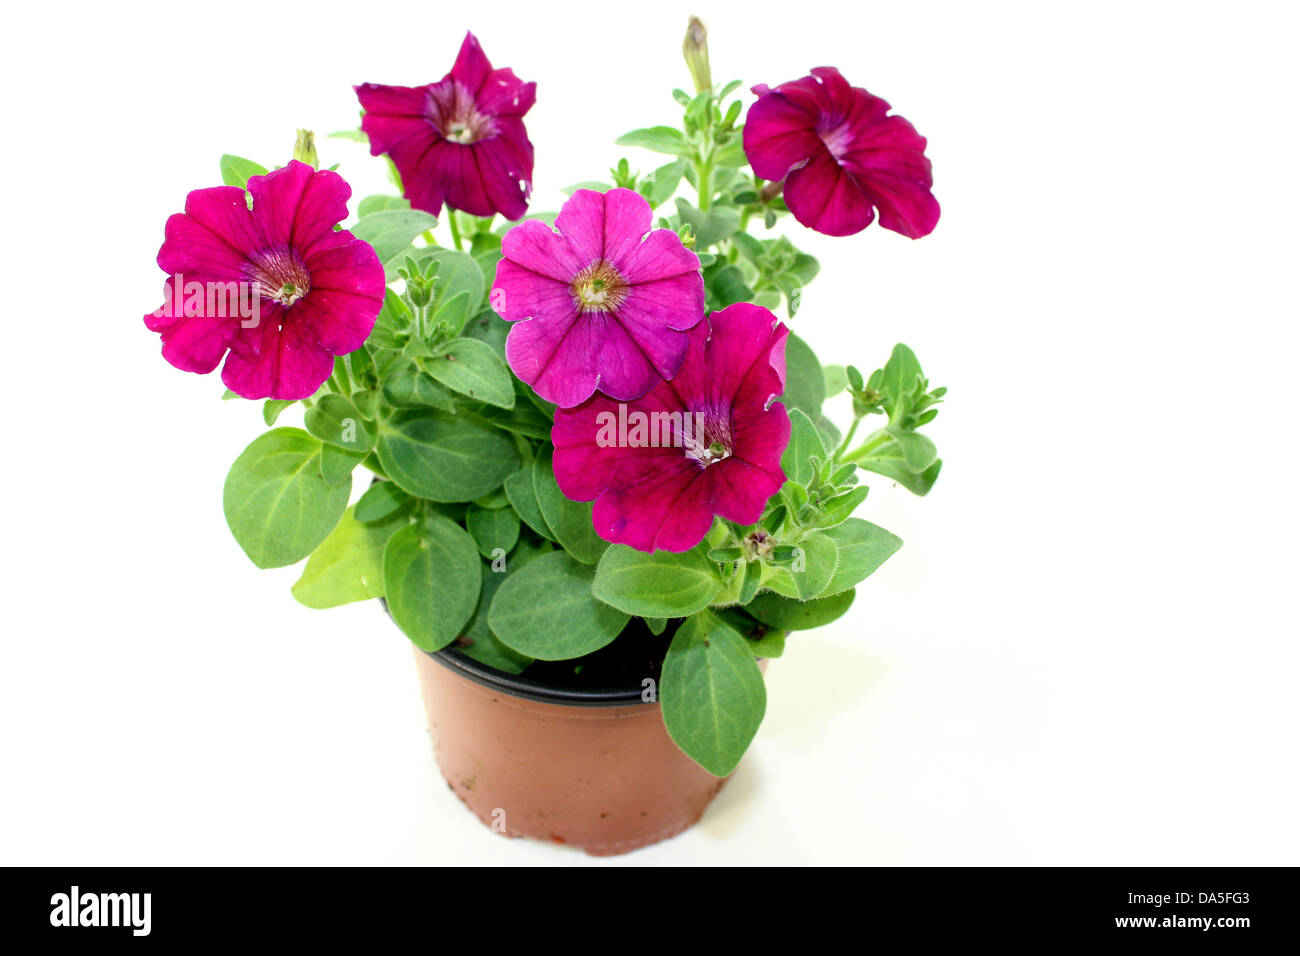 pink balcony plant in front of white background Stock Photo